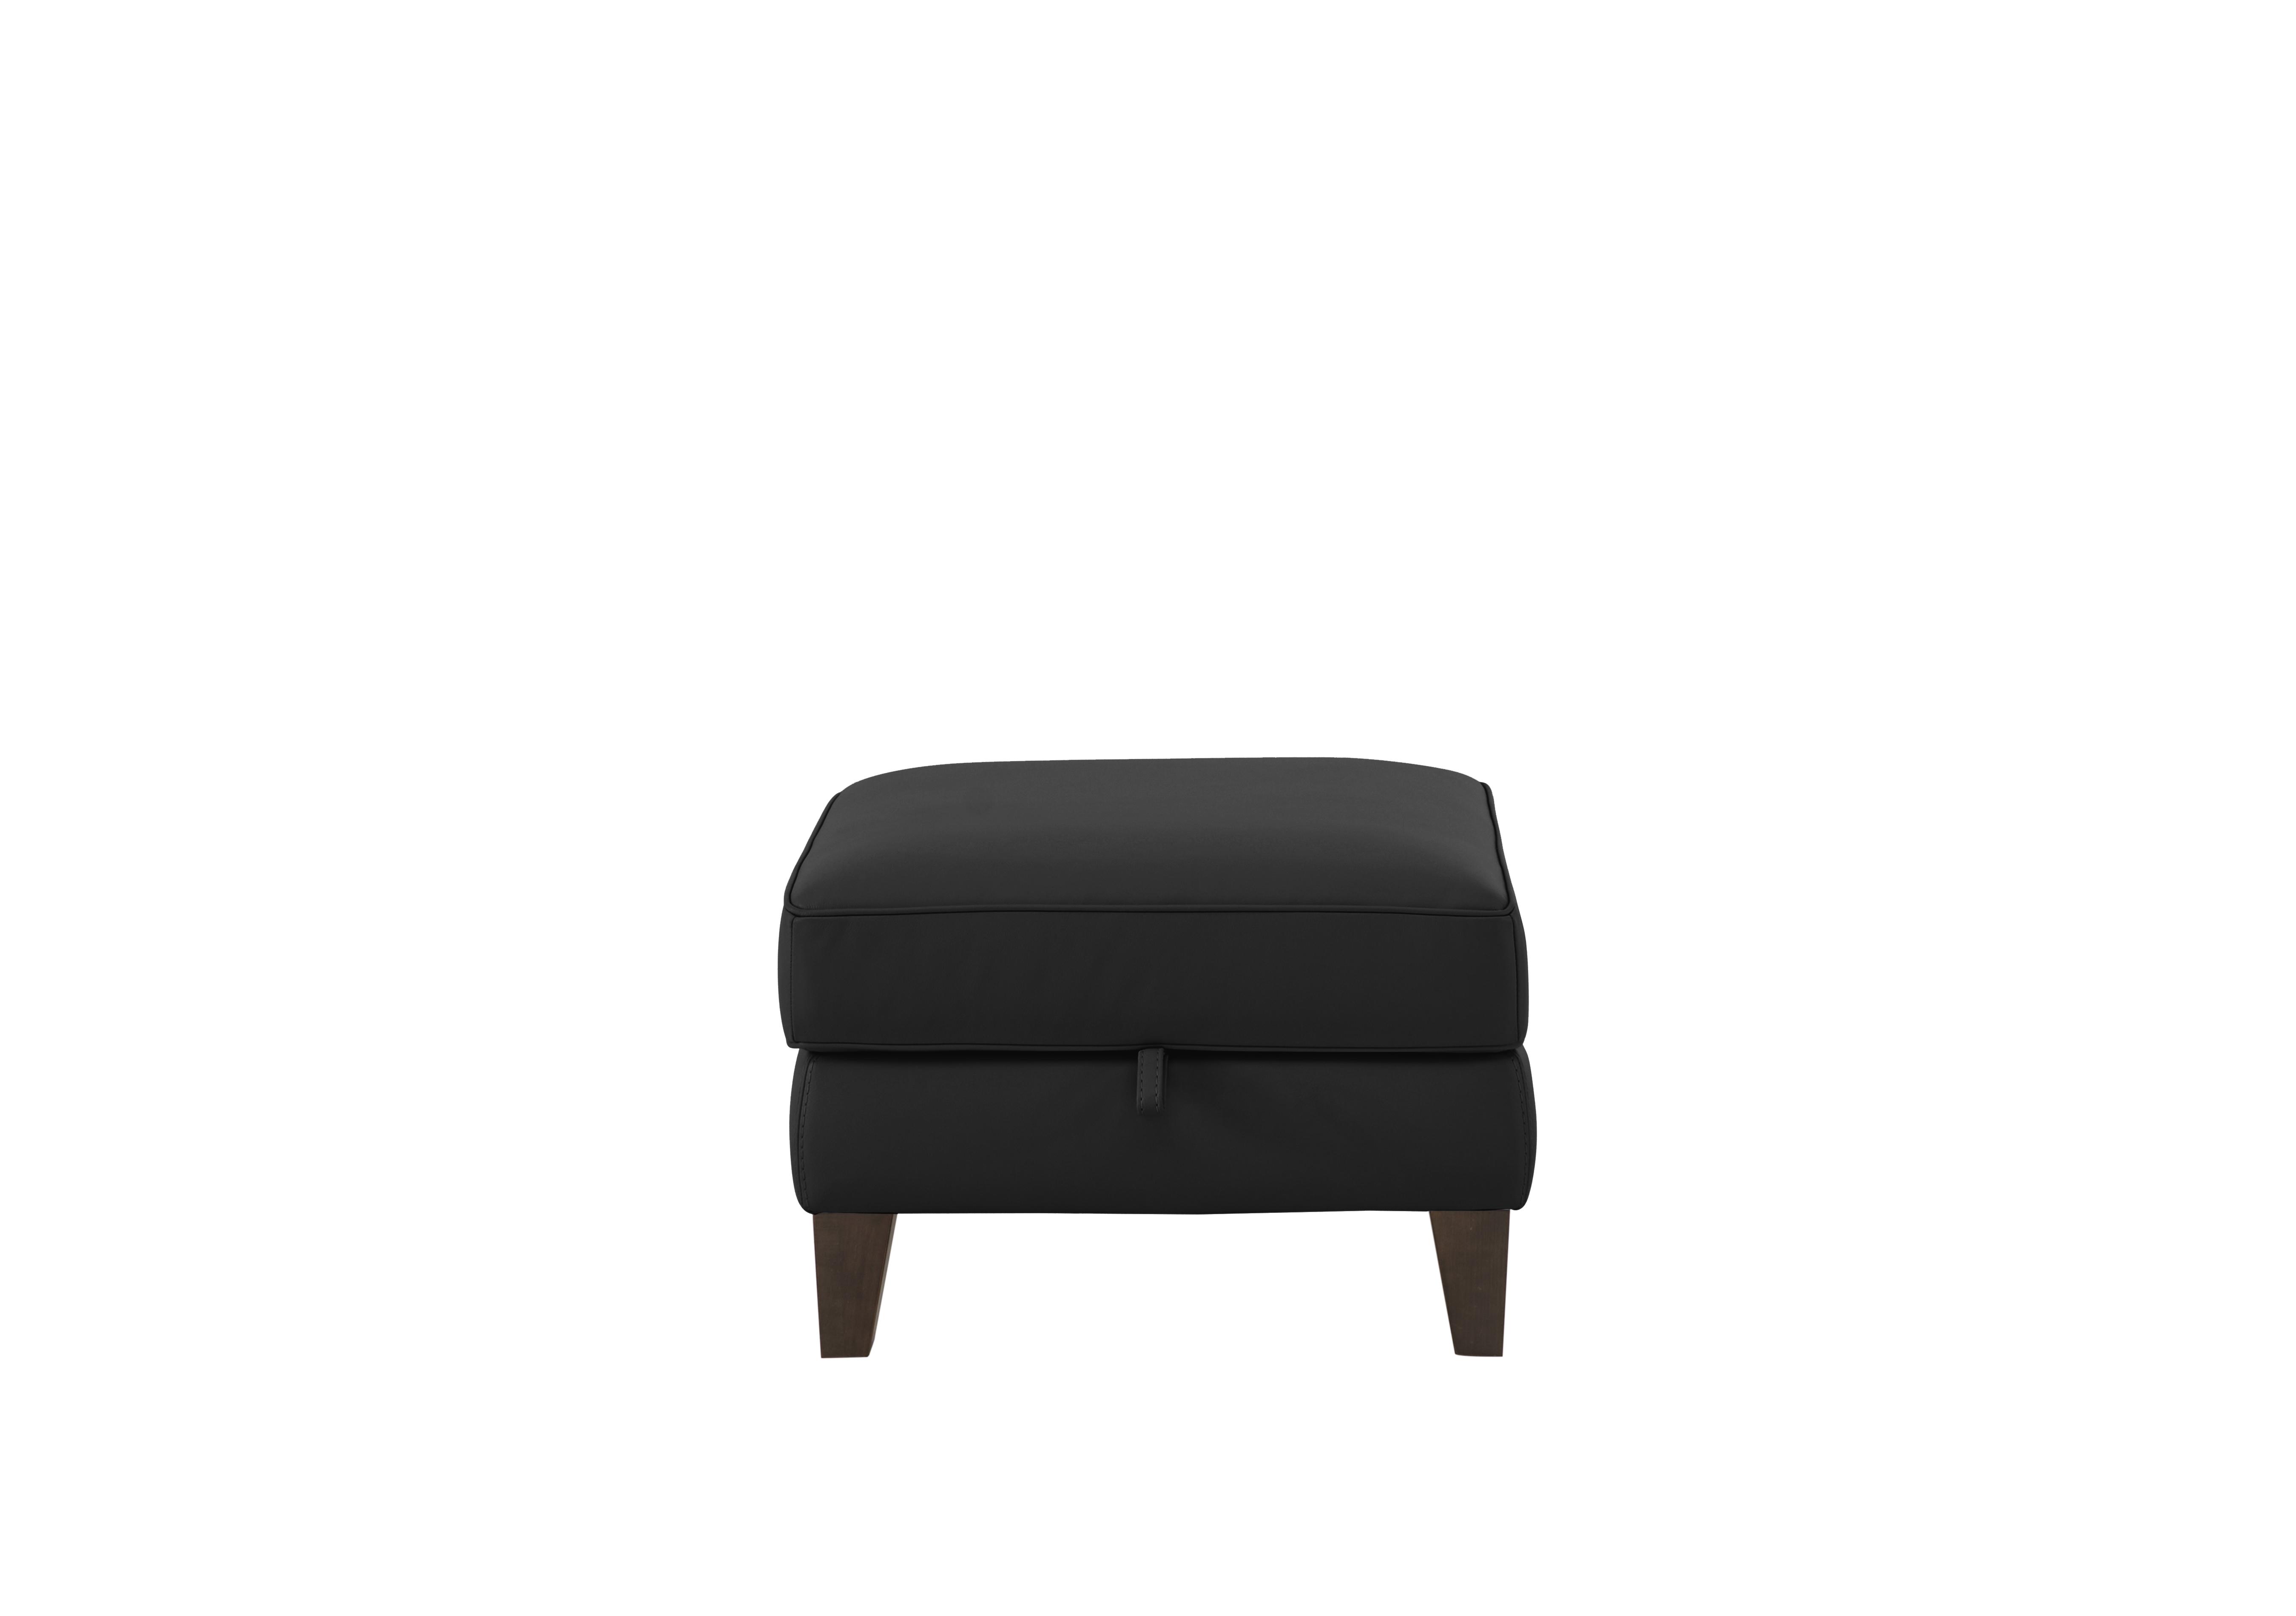 Brondby Leather Storage Footstool in Bv-3500 Classic Black on Furniture Village